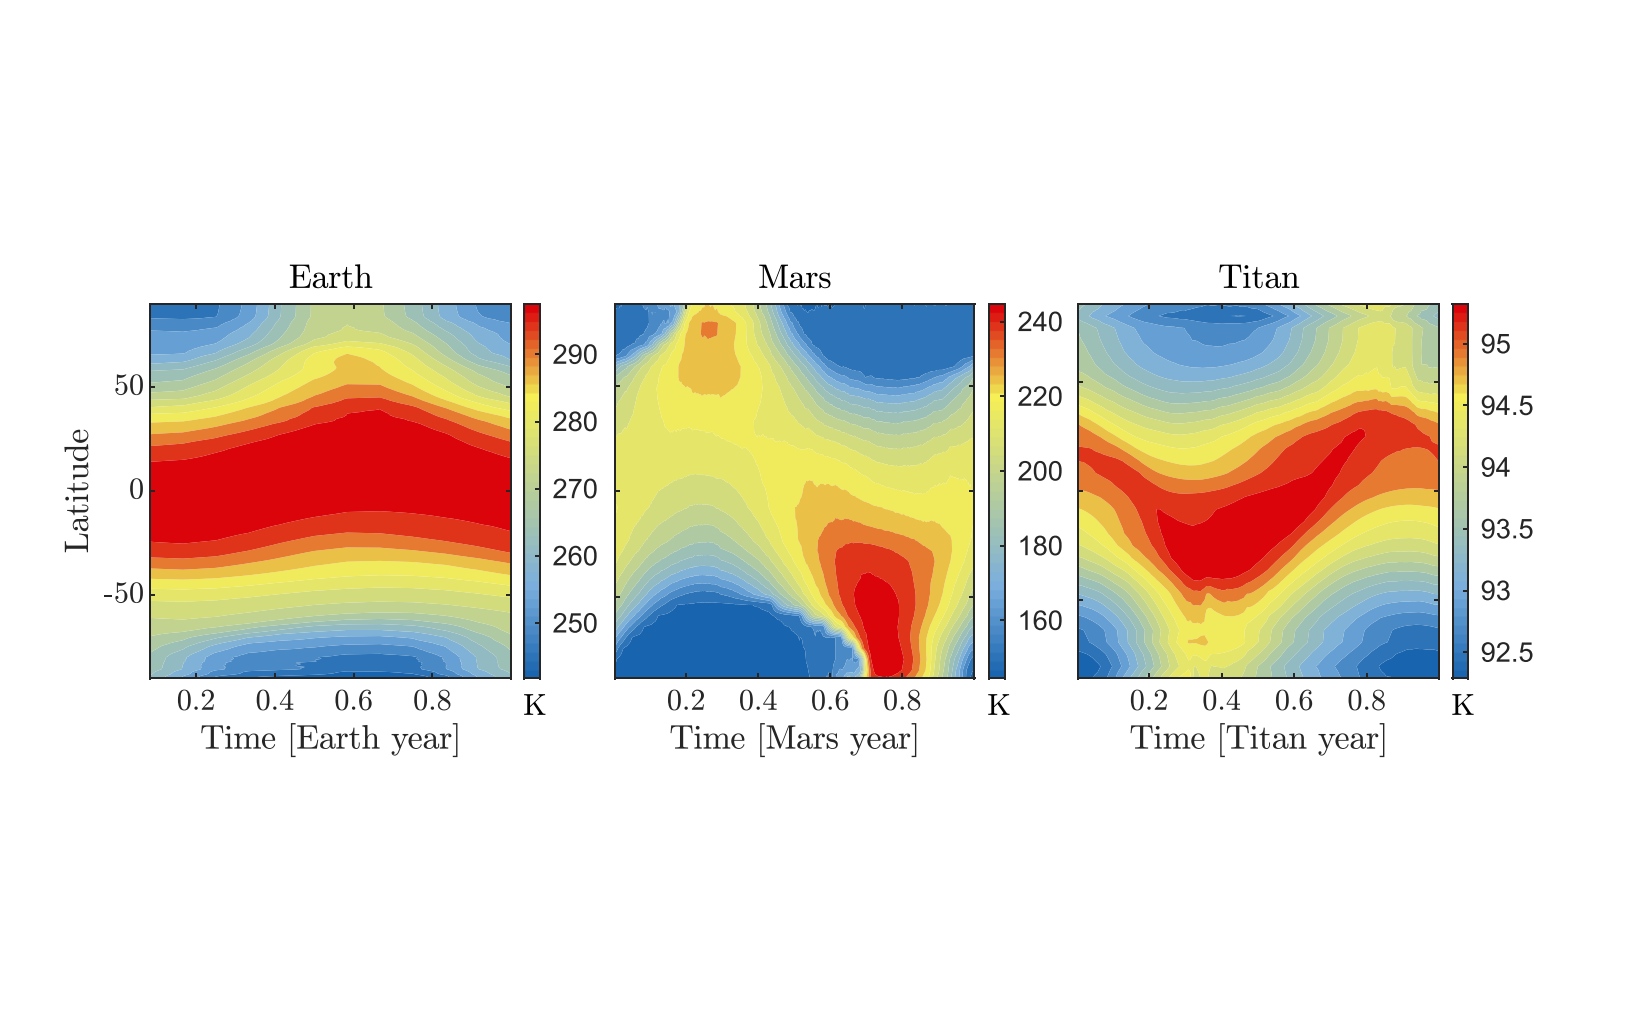 The Key Factors Controlling the Seasonality of Planetary Climate